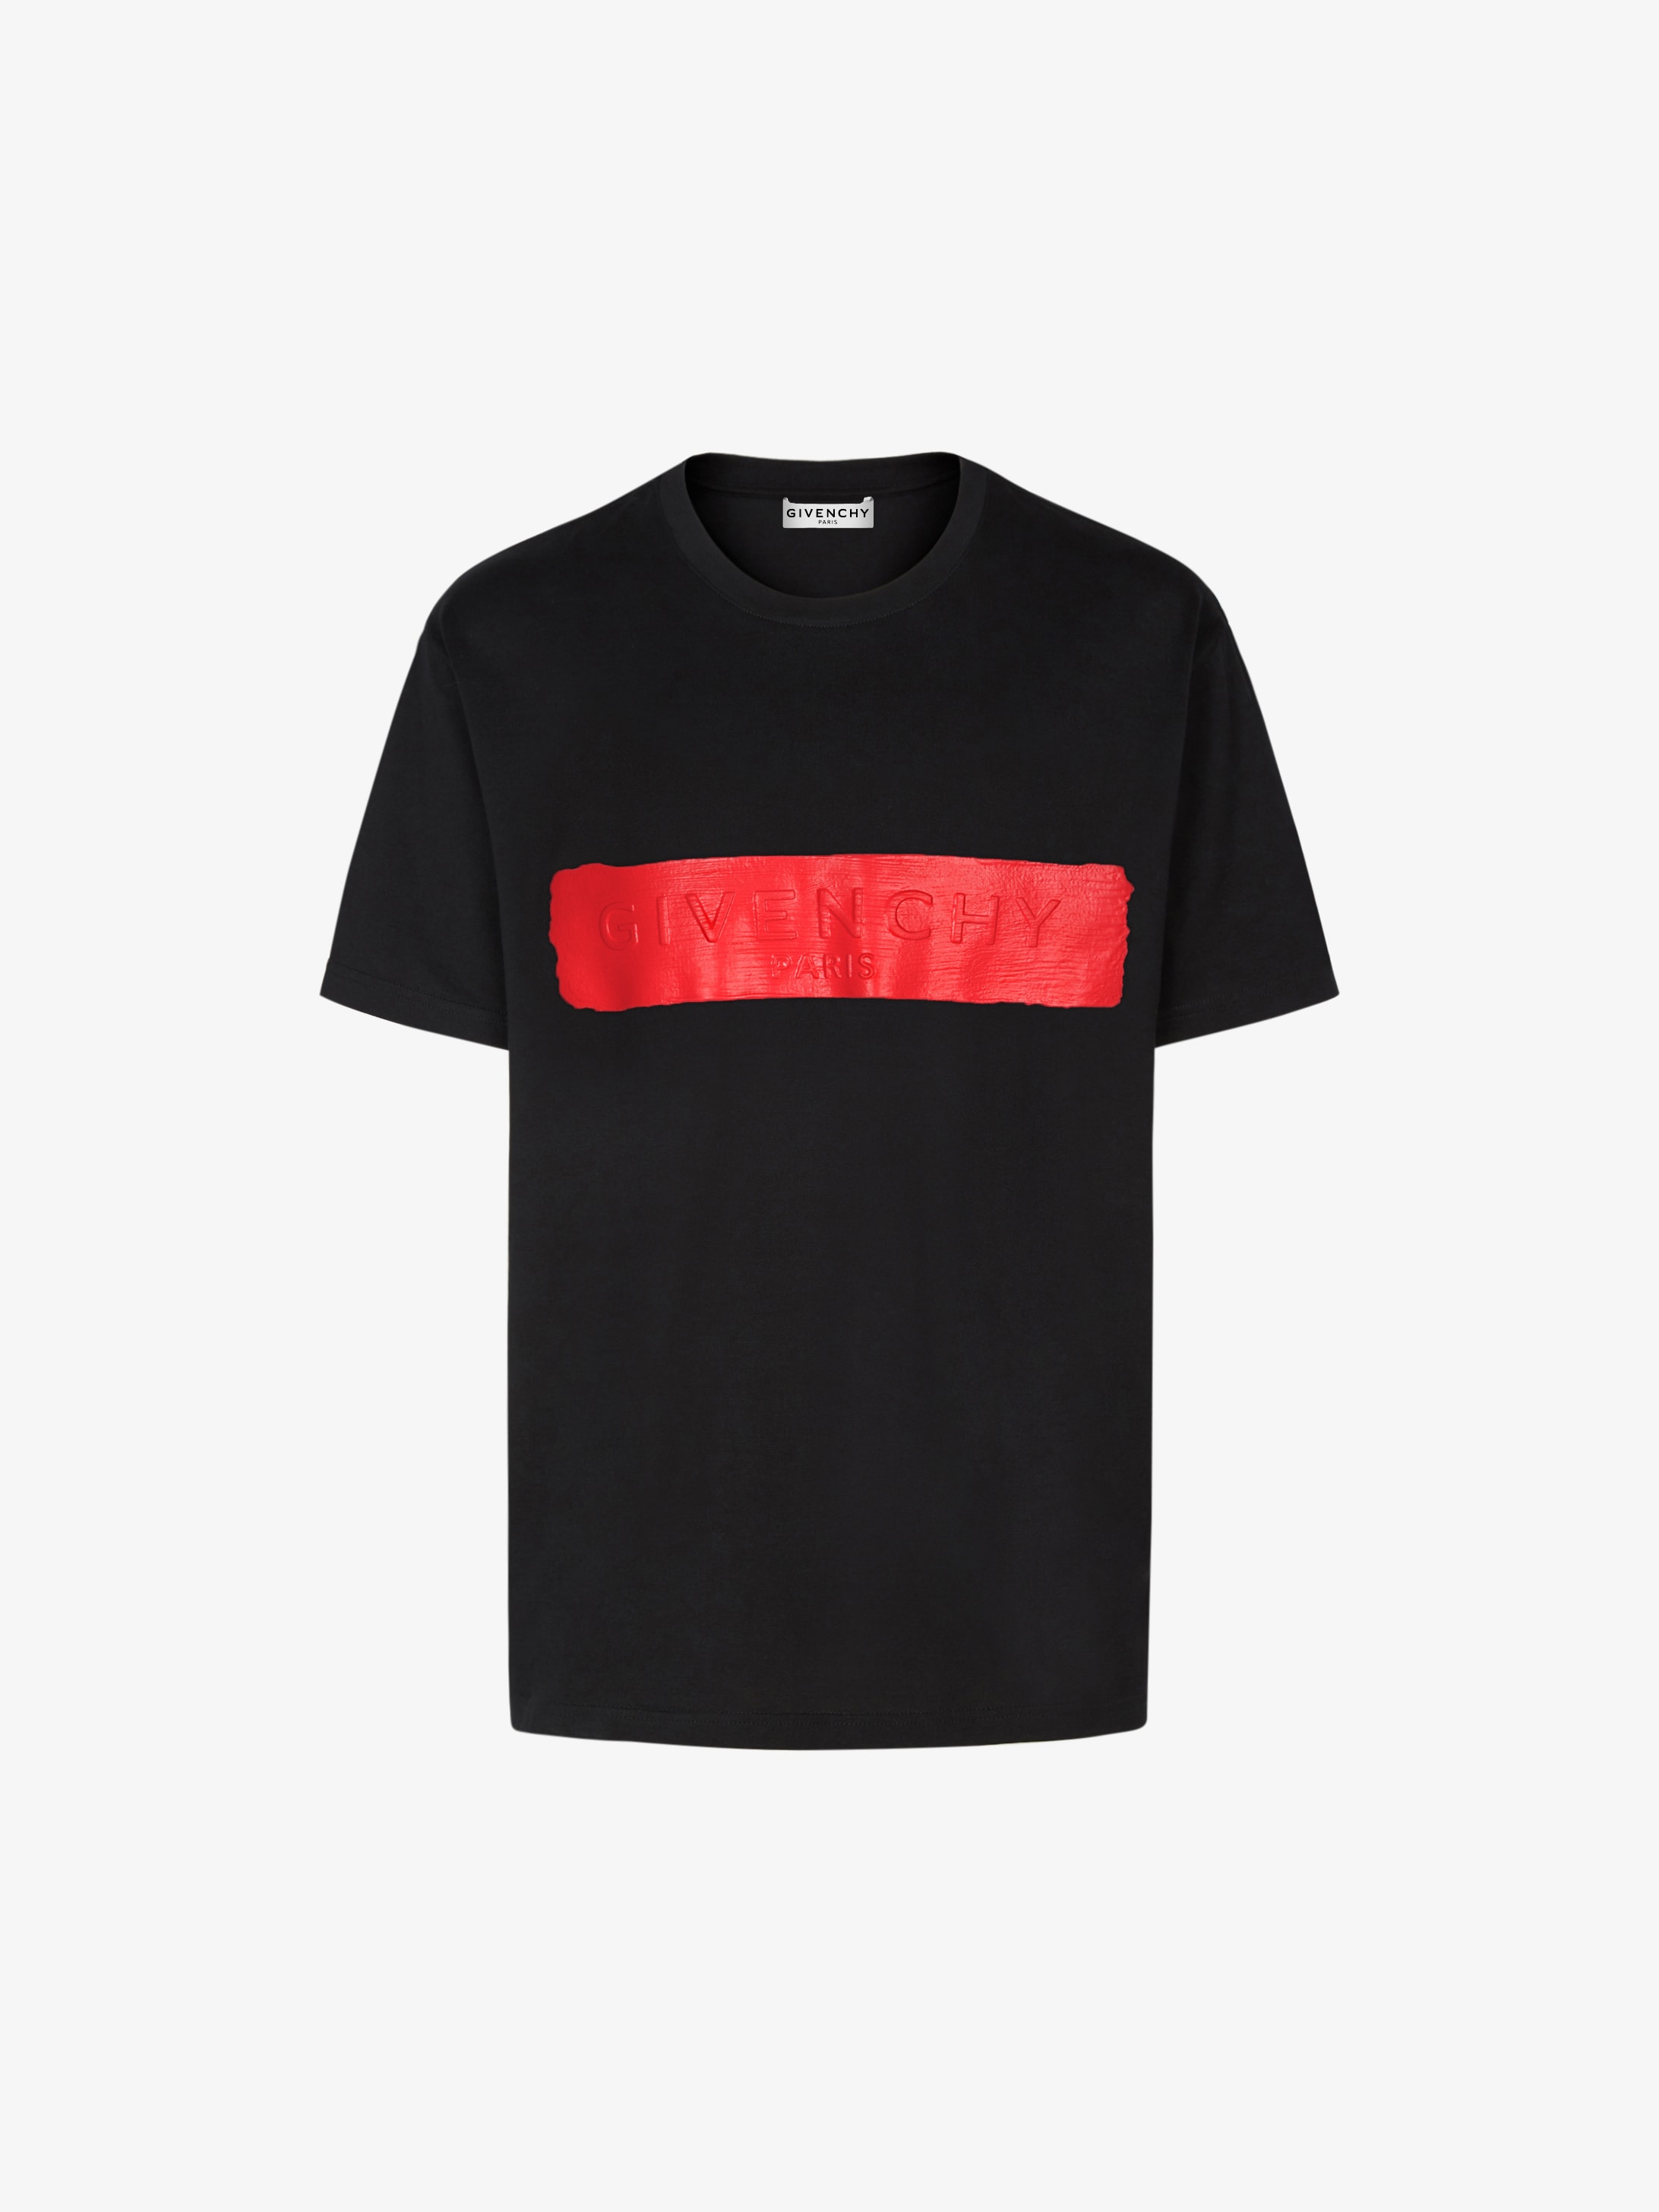 red givenchy shirt